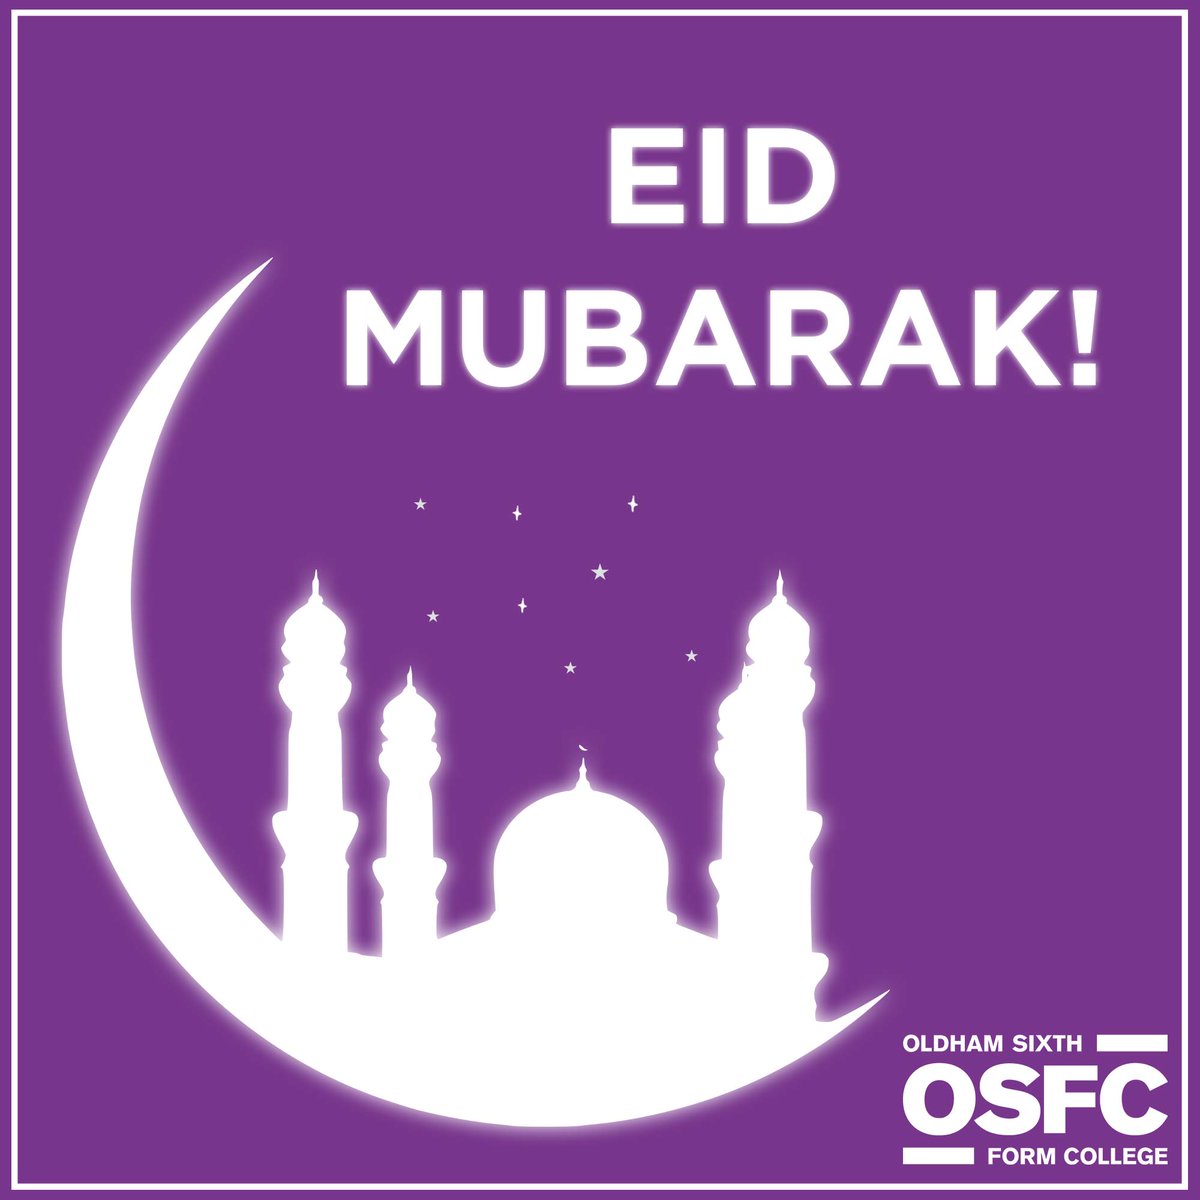 🎉Eid Mubarak to all our staff and students celebrating! We hope you have a lovely time with your families. #EidMubarak